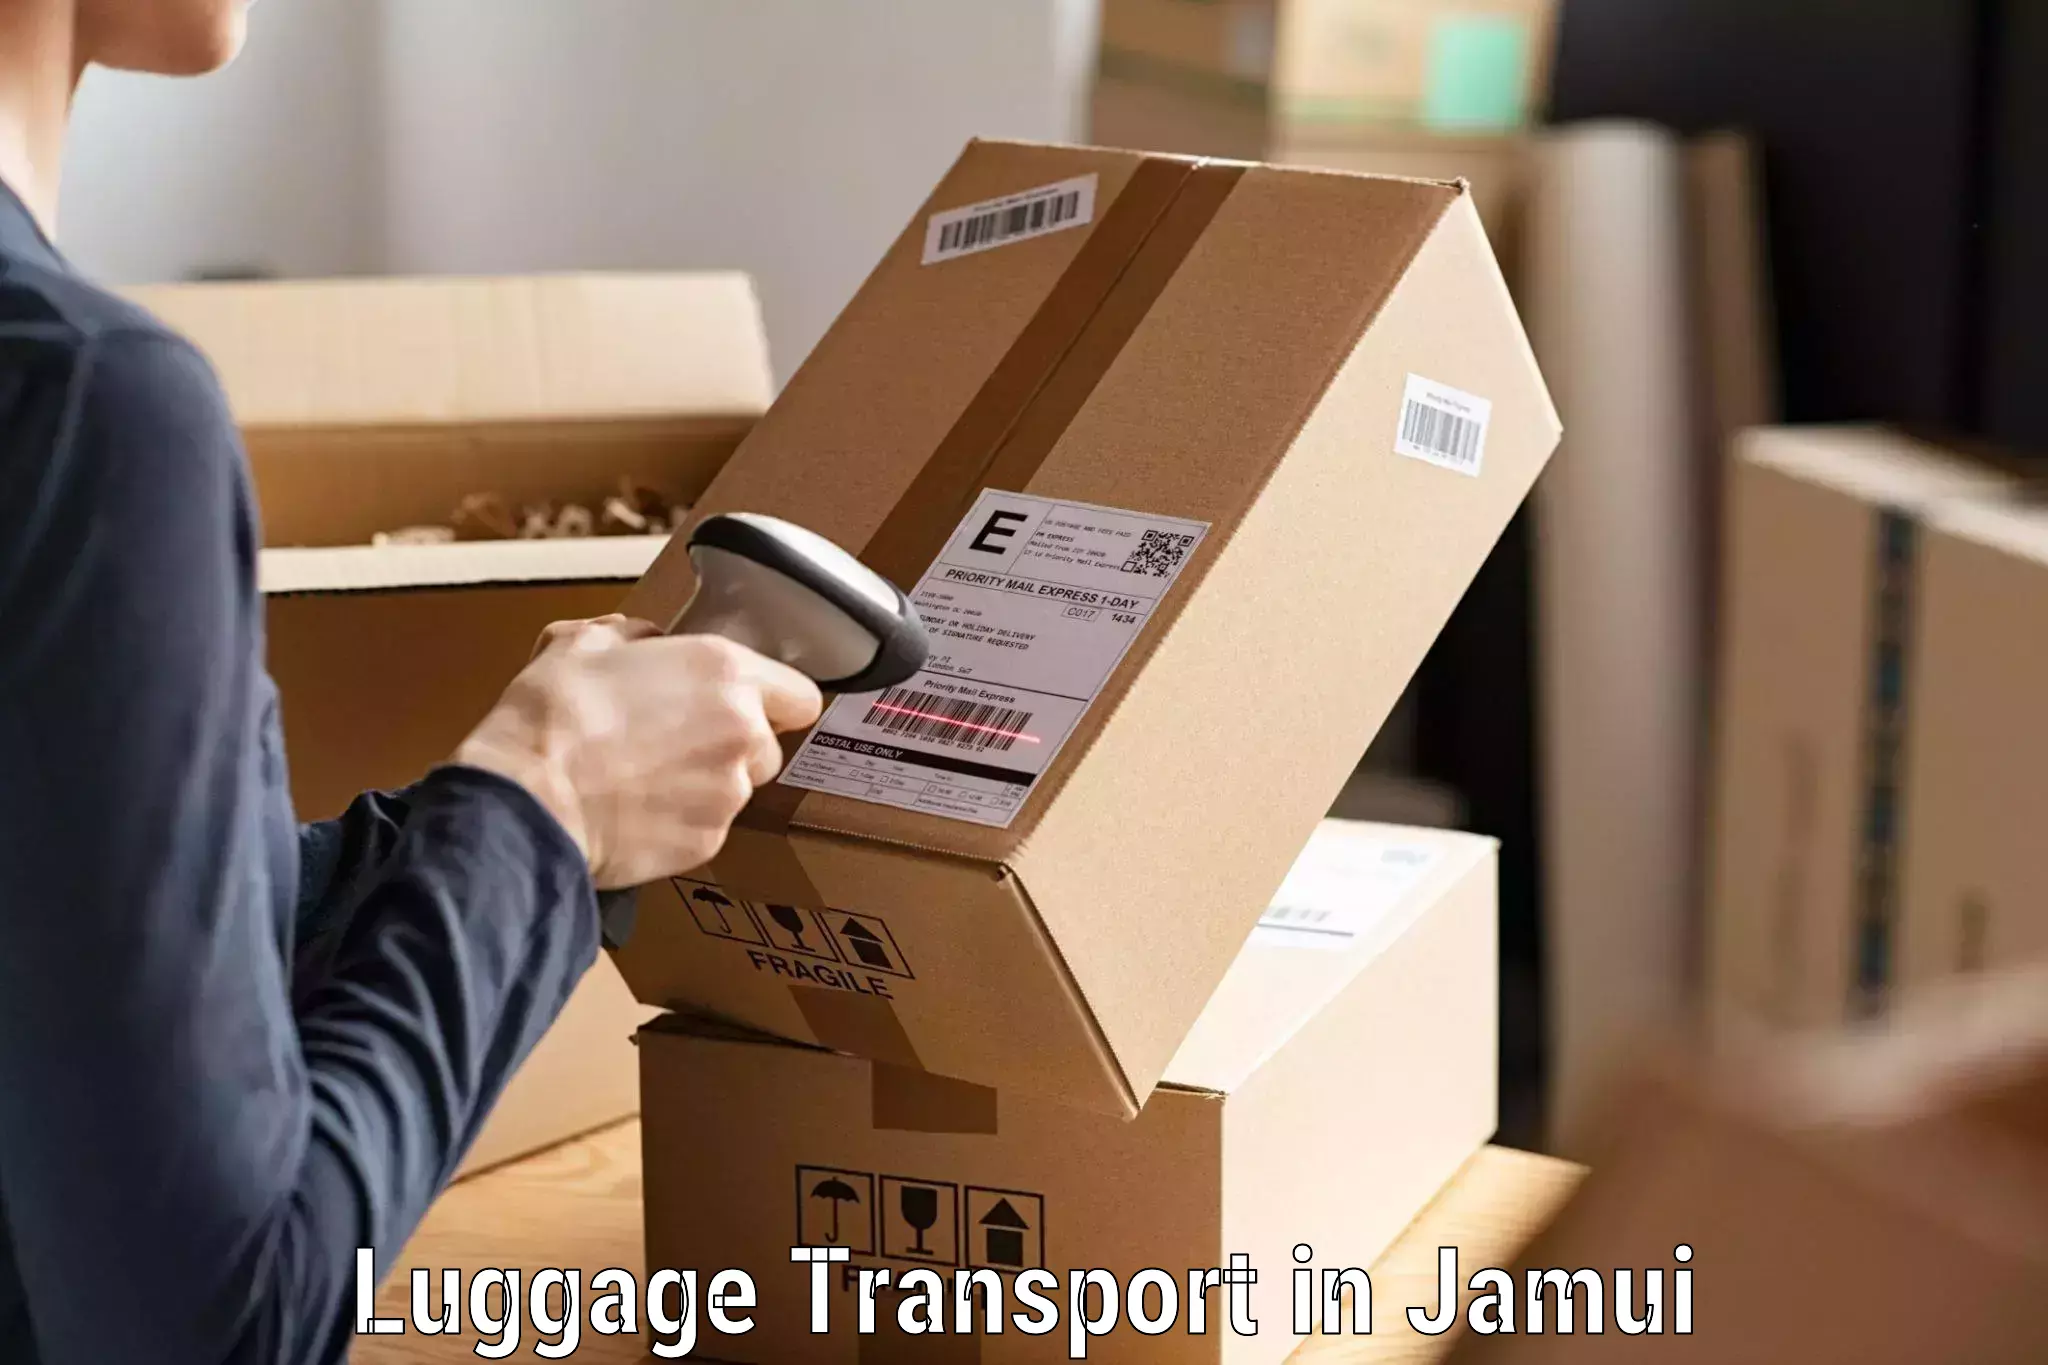 Business luggage transport in Jamui